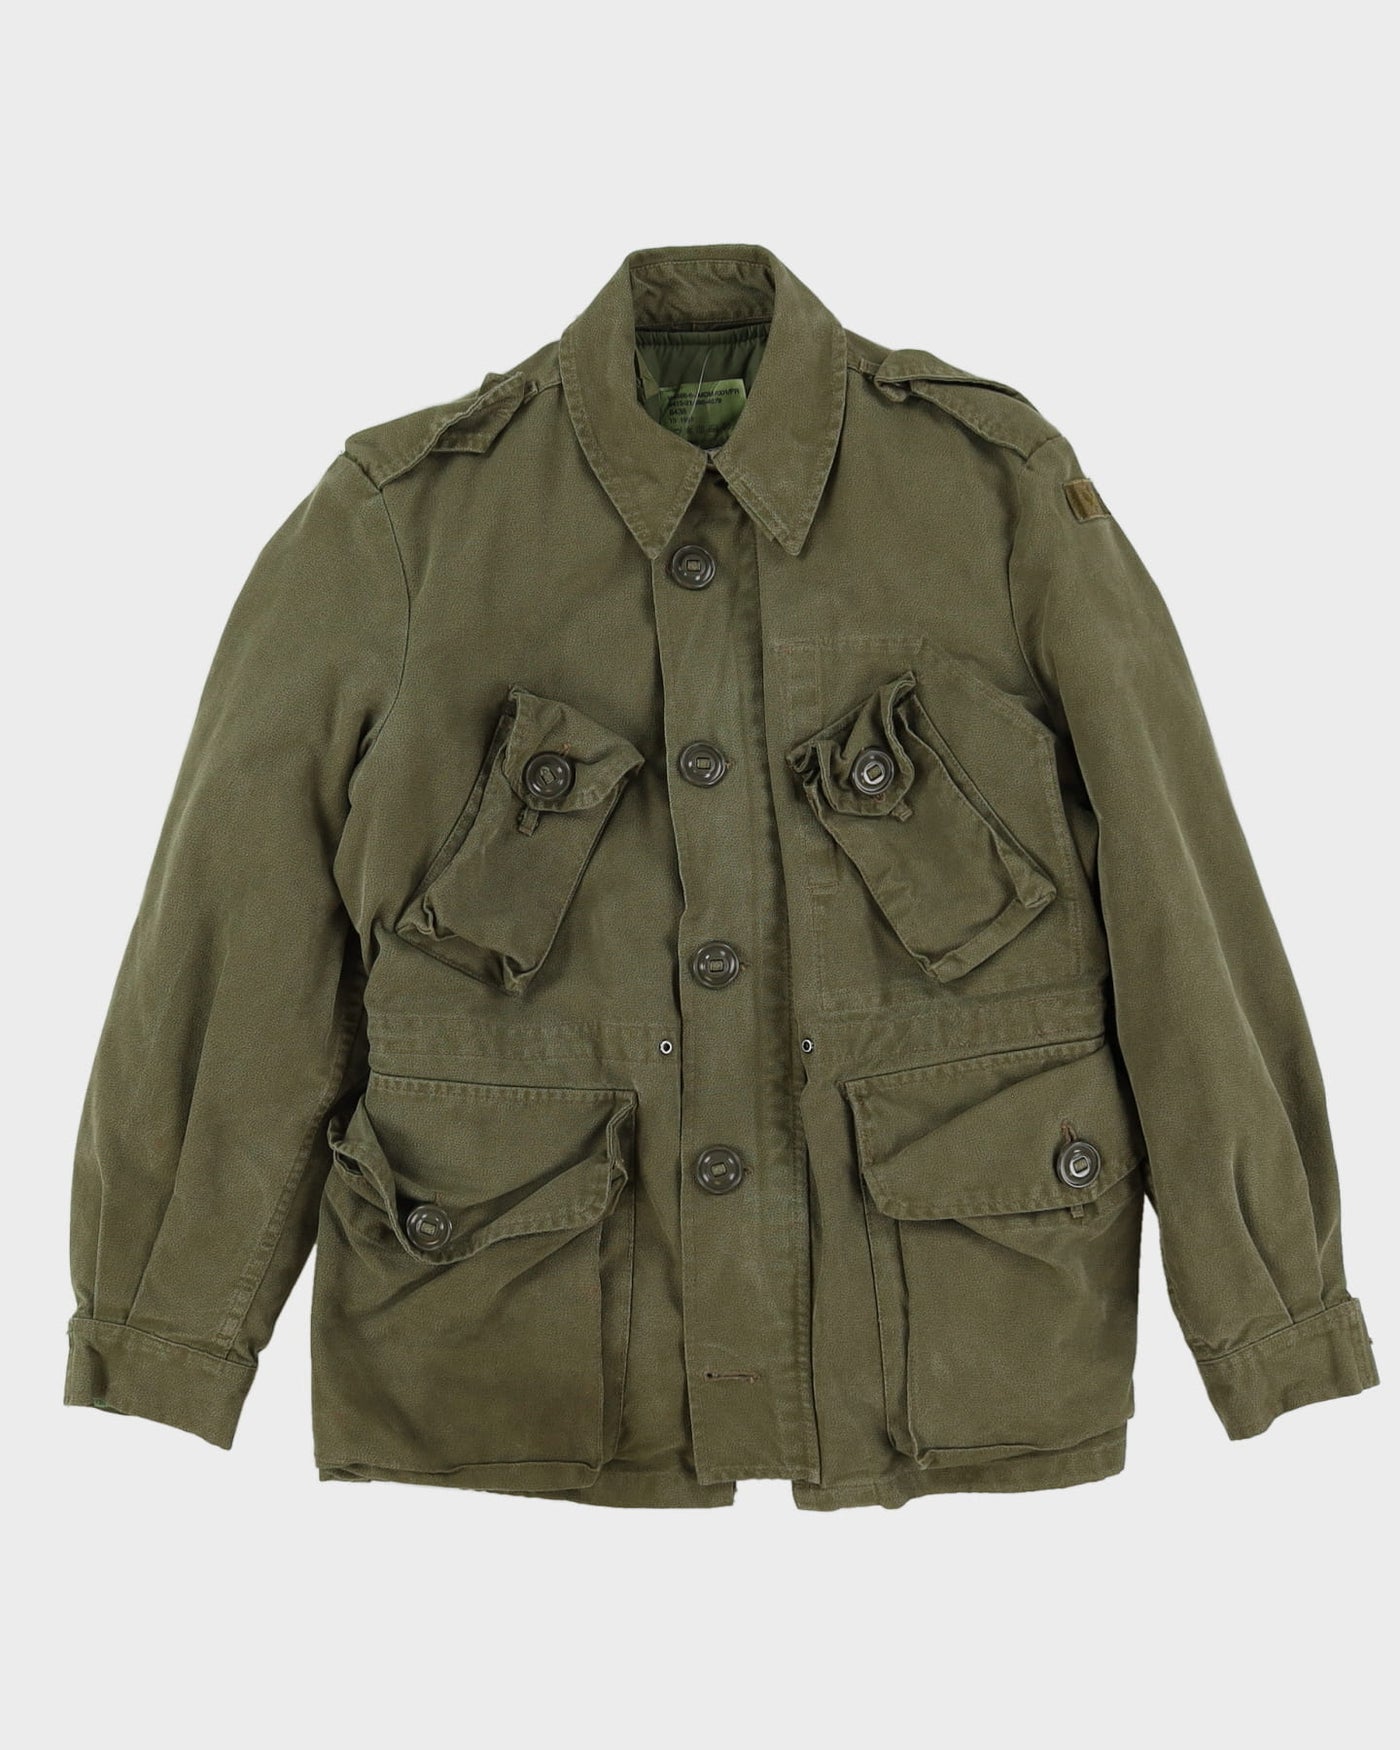 90s Vintage Canadian Army GS Field Jacket - Small